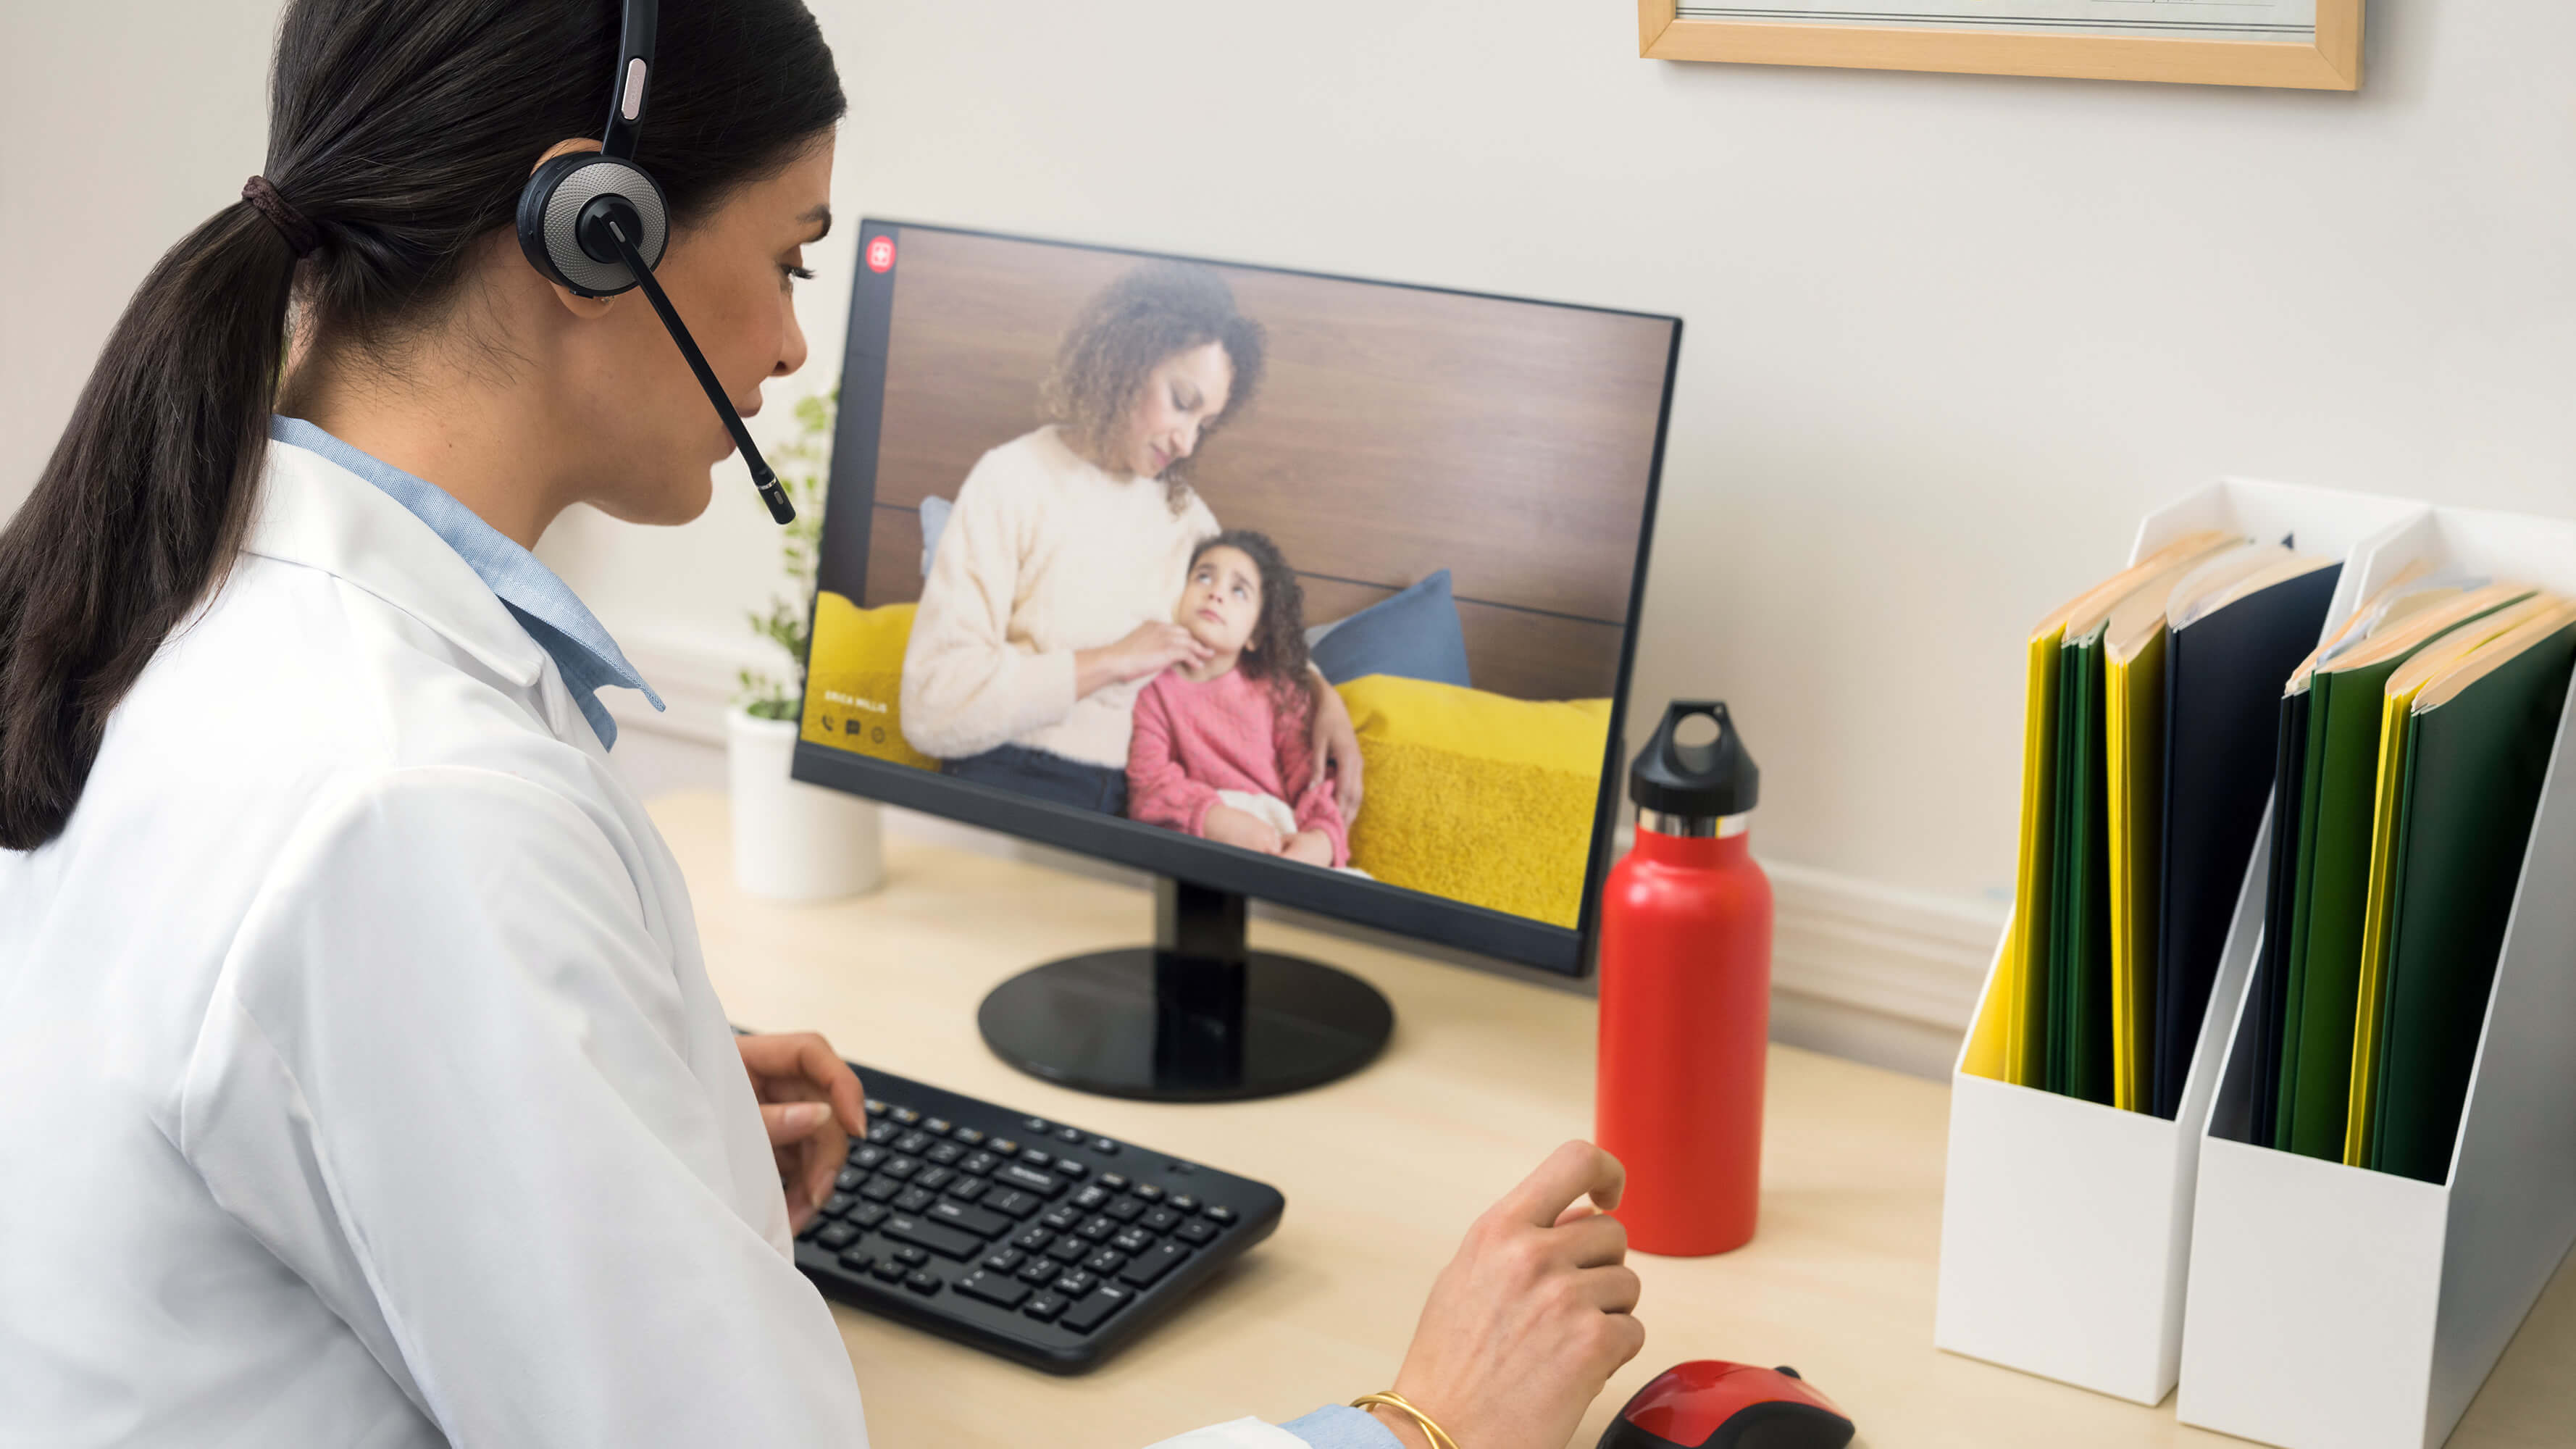 A practitioner consults a female adult patient with a child via video call during a telemedicine visit.